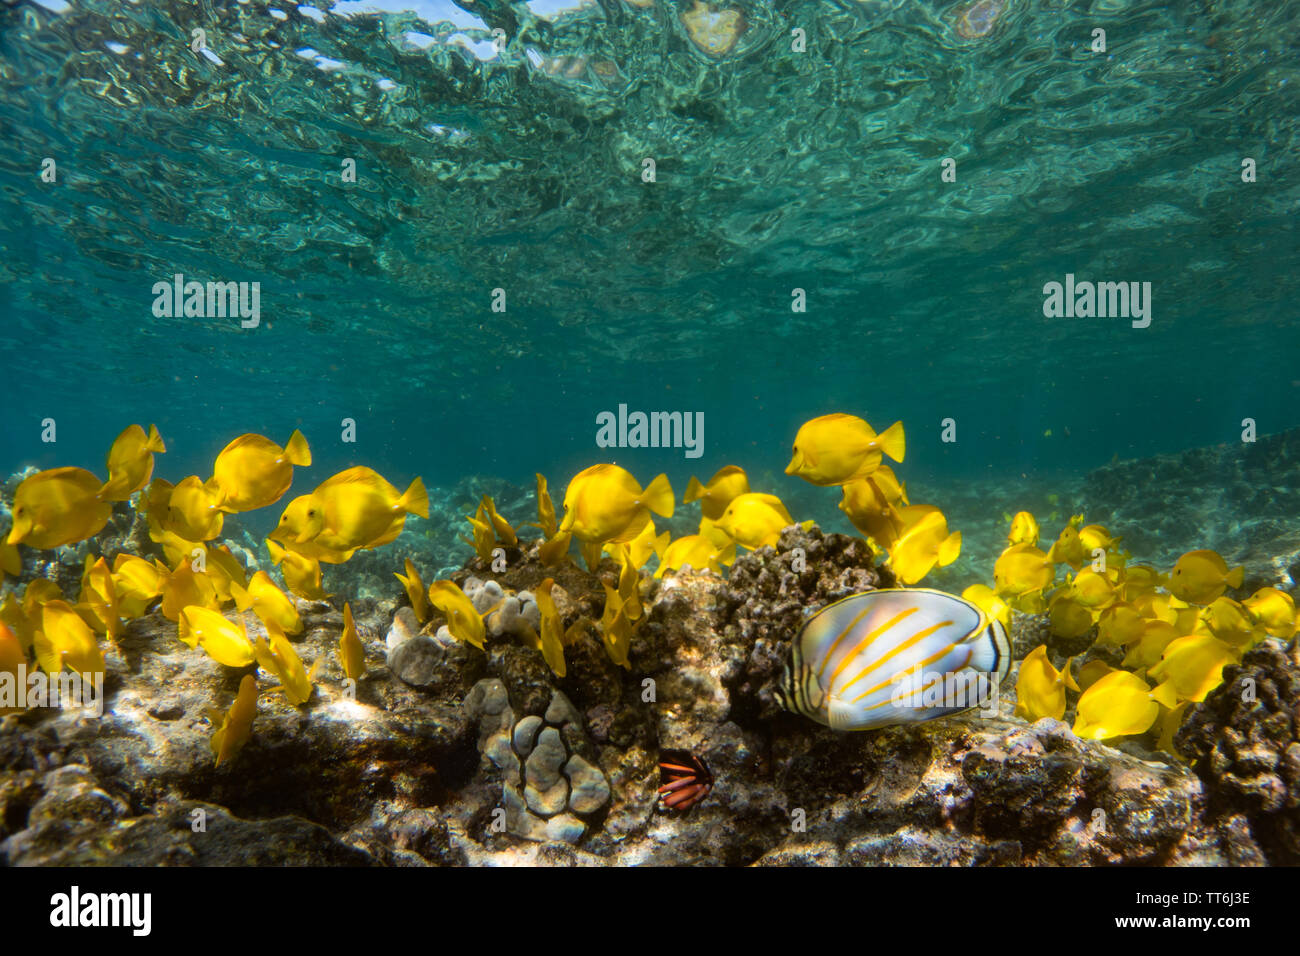 A school of yellow tang, Zebrasoma flavescens, while snorkeling at the Captain Cook Monument, Kealakekua bay, Hawaii Stock Photo